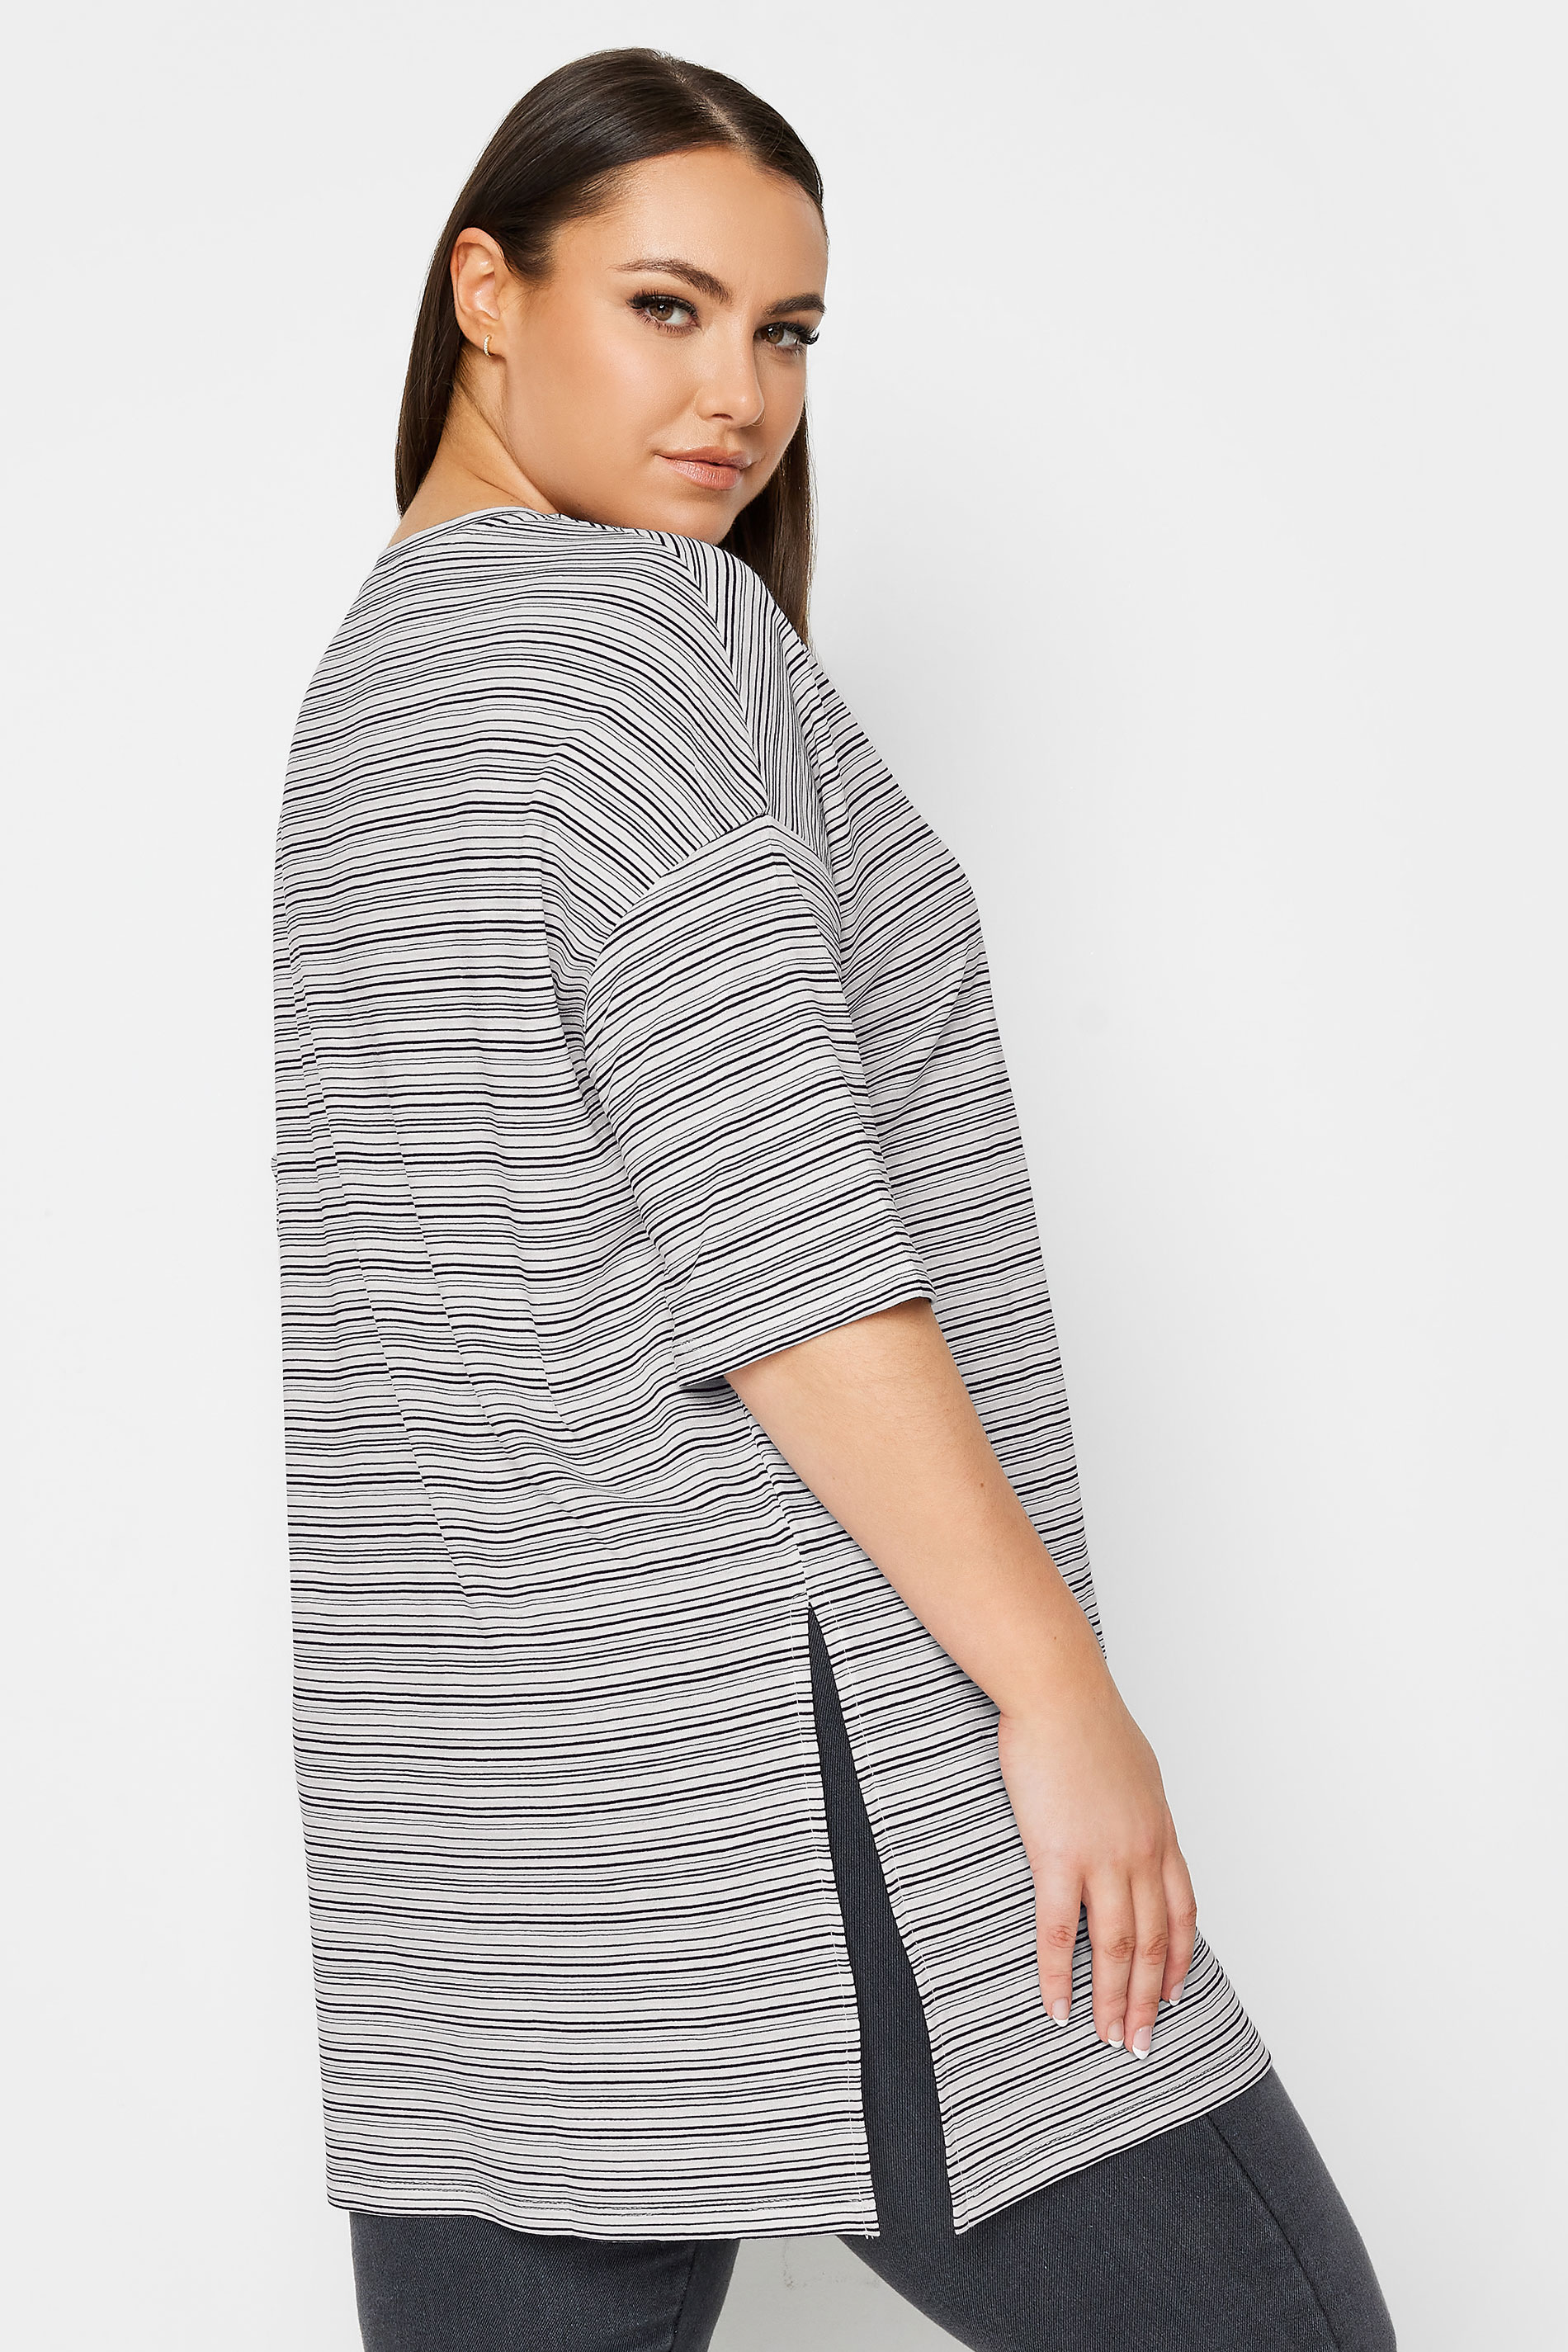 YOURS Curve White Stripe Oversized Top | Yours Clothing 3